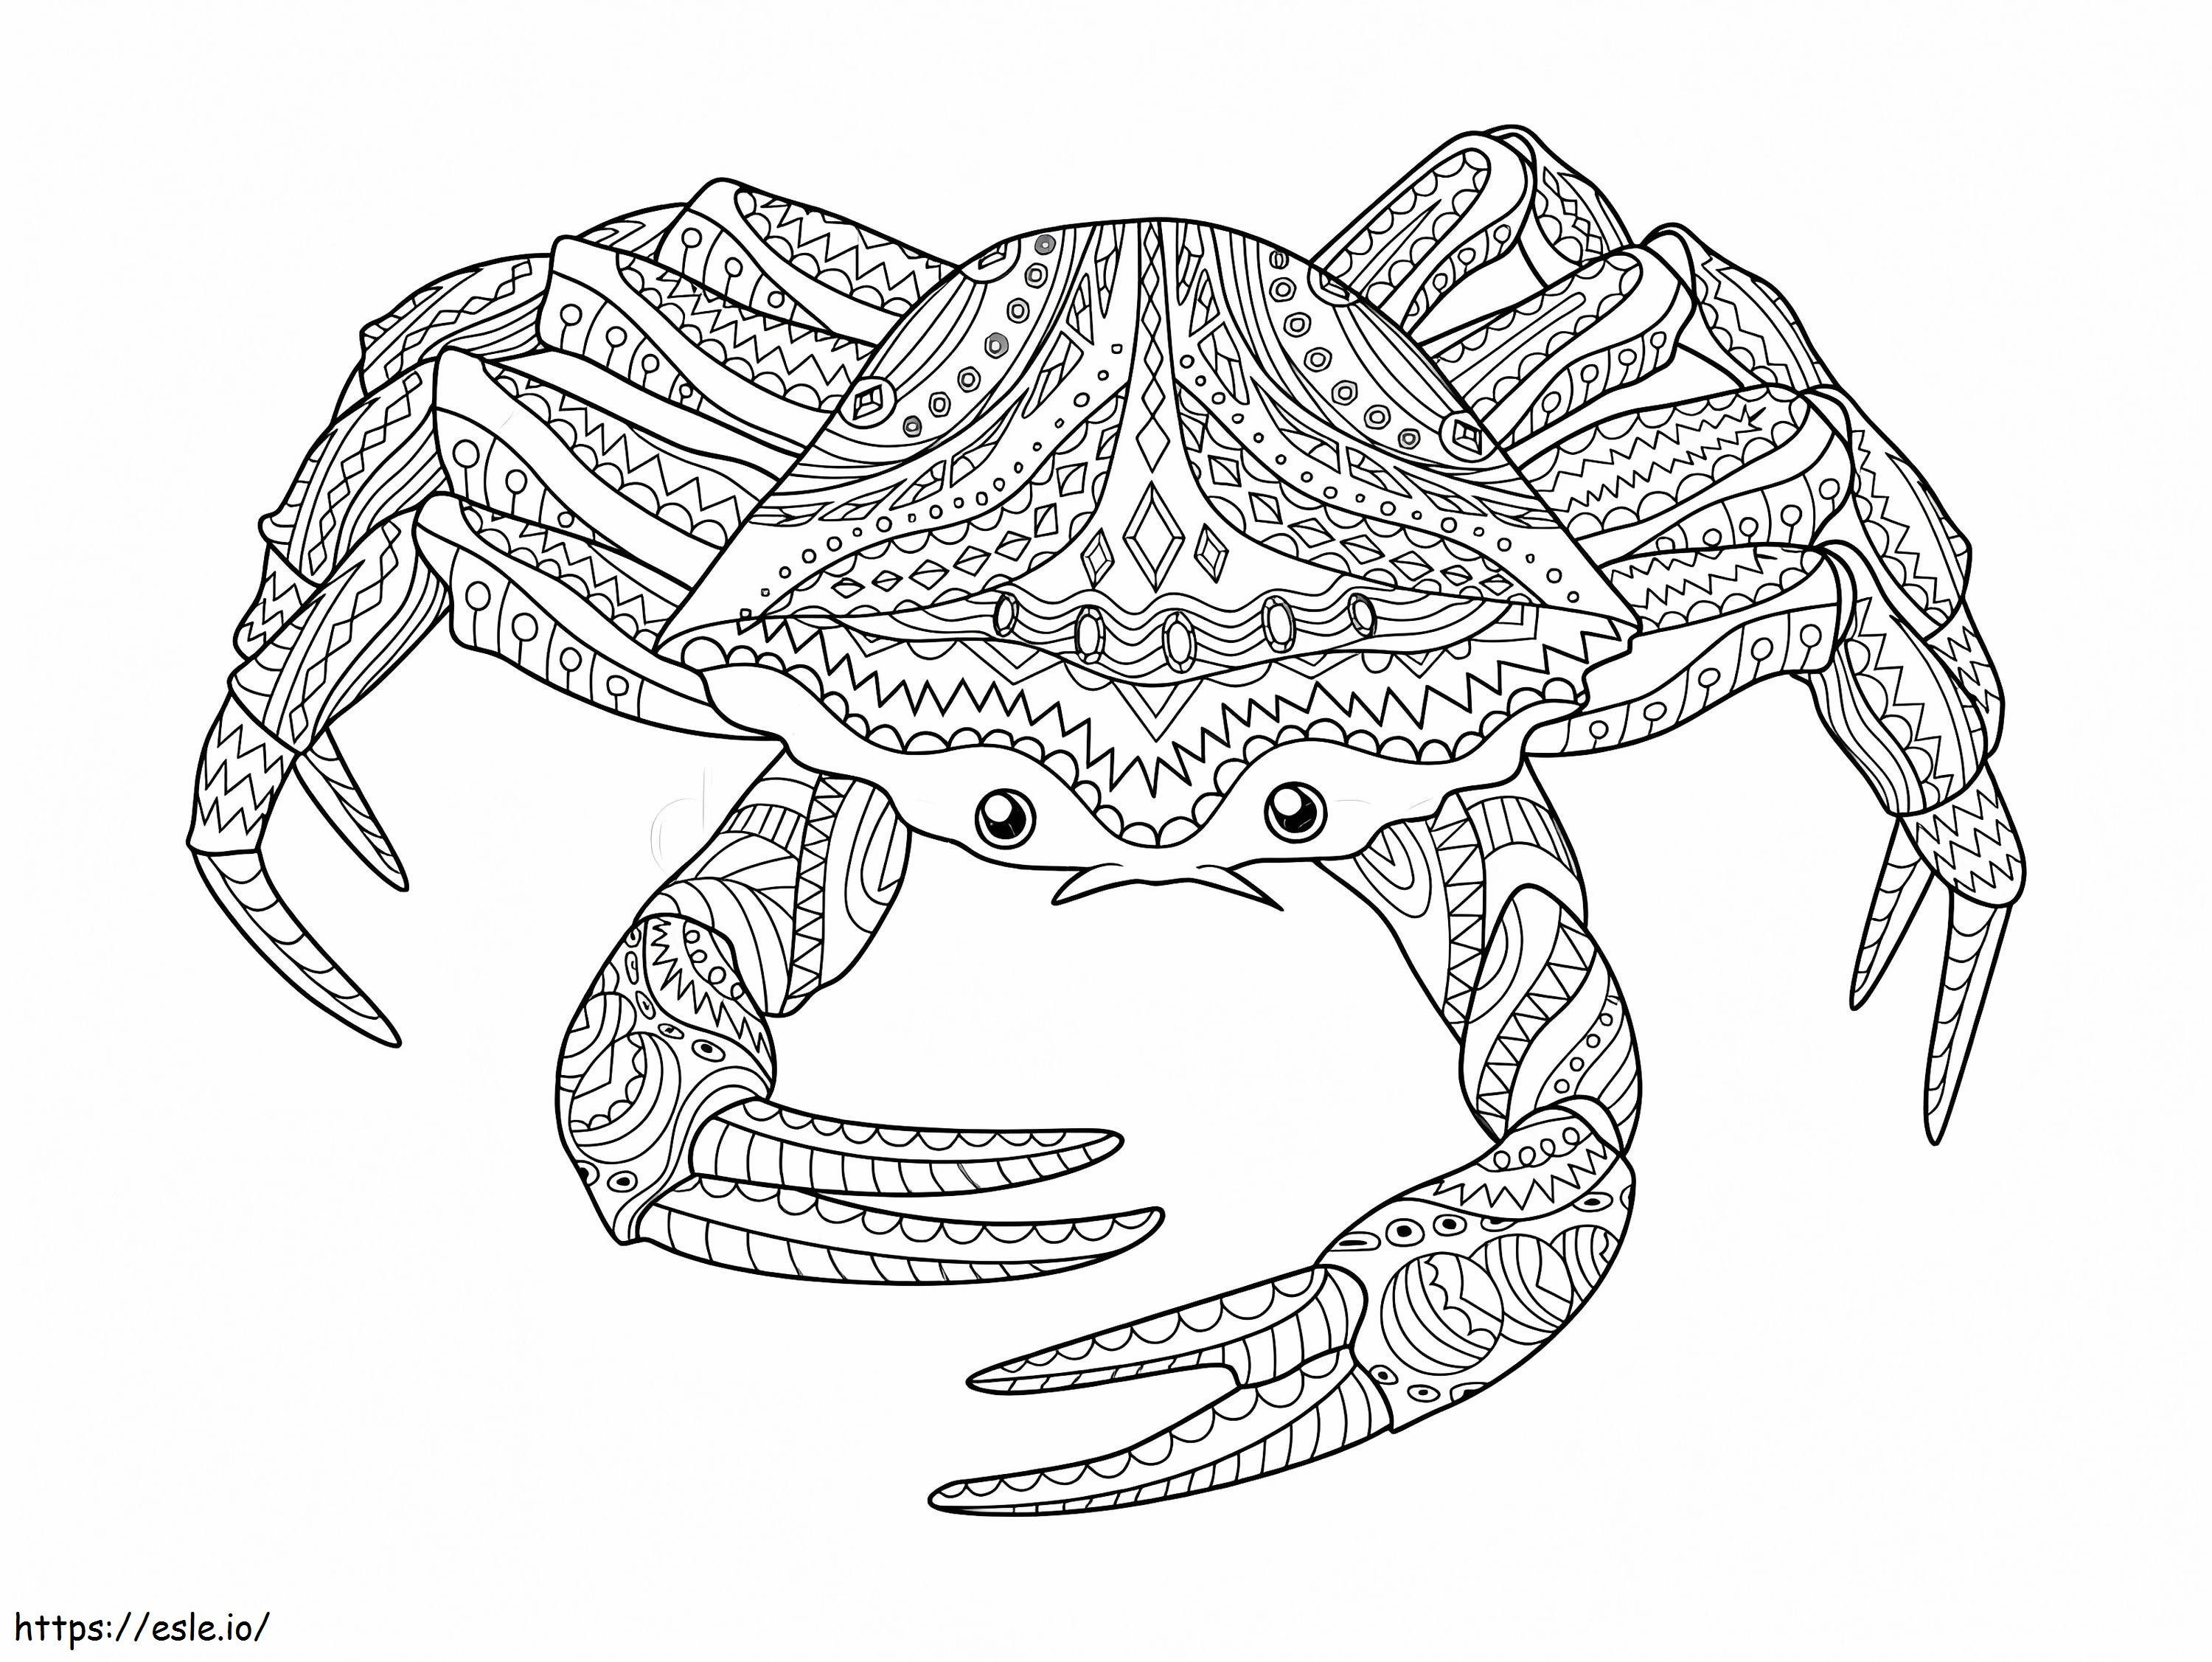 Crab Is For Adults coloring page